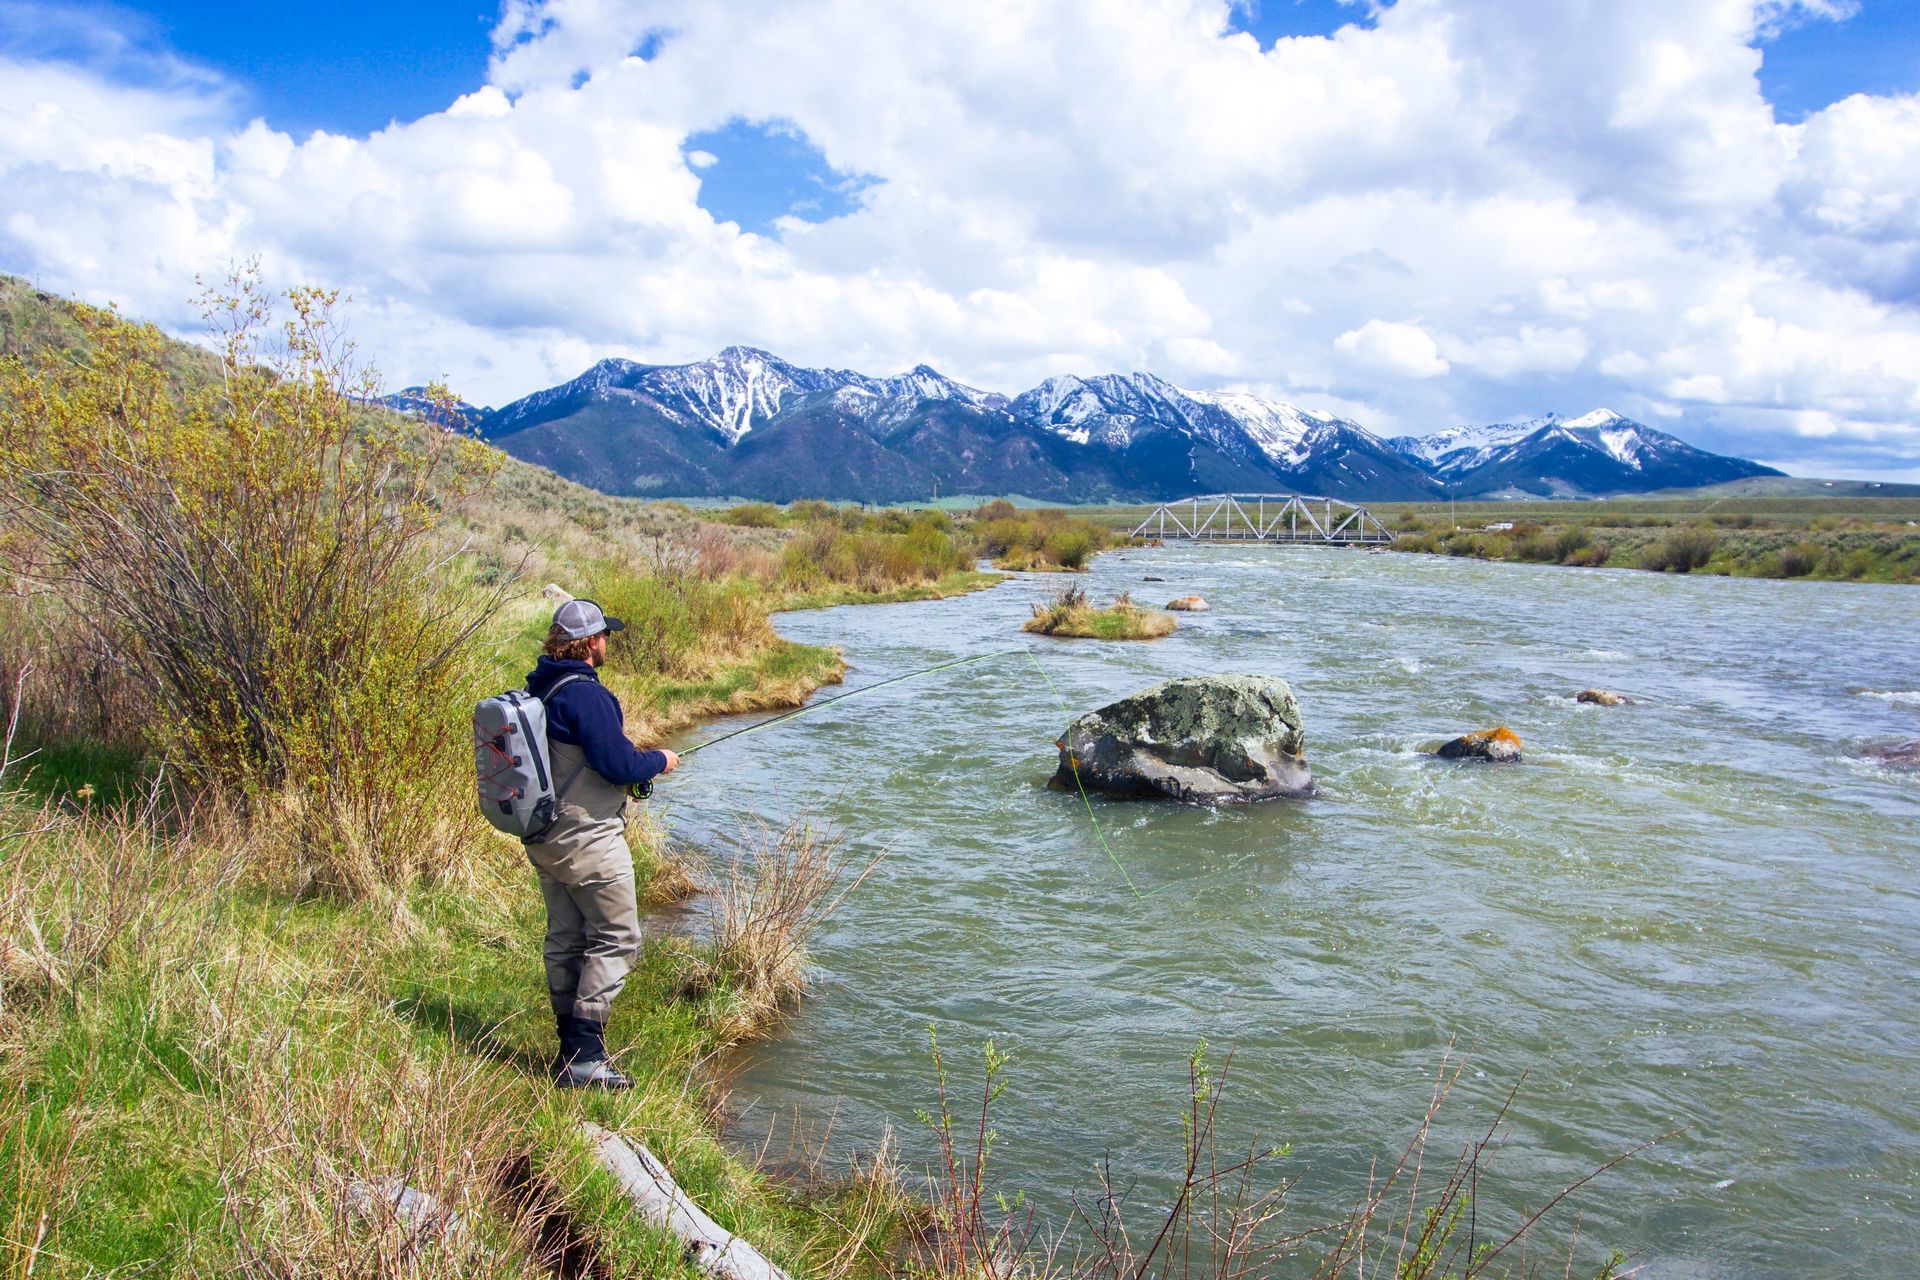 A man is fishing in a river with mountains in the background.